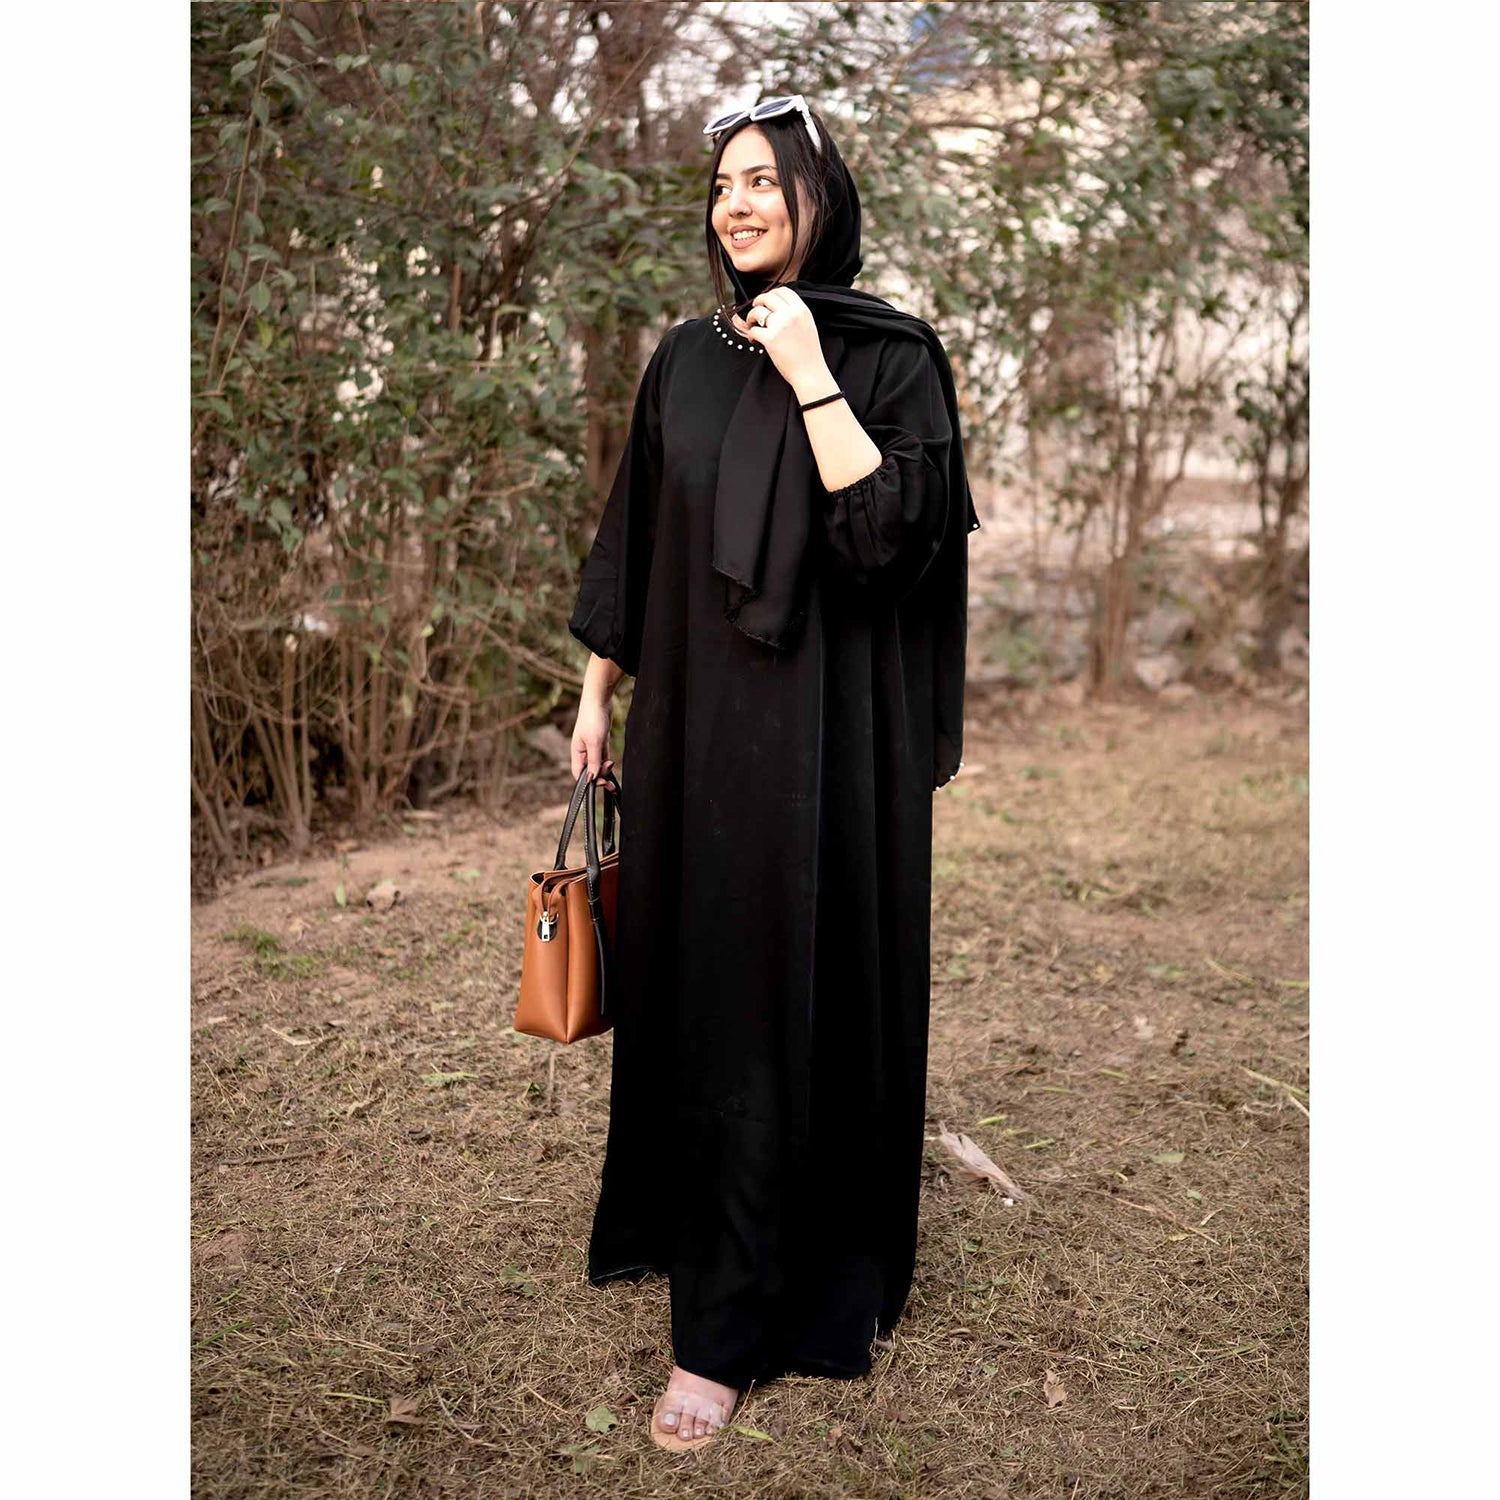 Effortless Sophistication Contemporary Abaya Styles